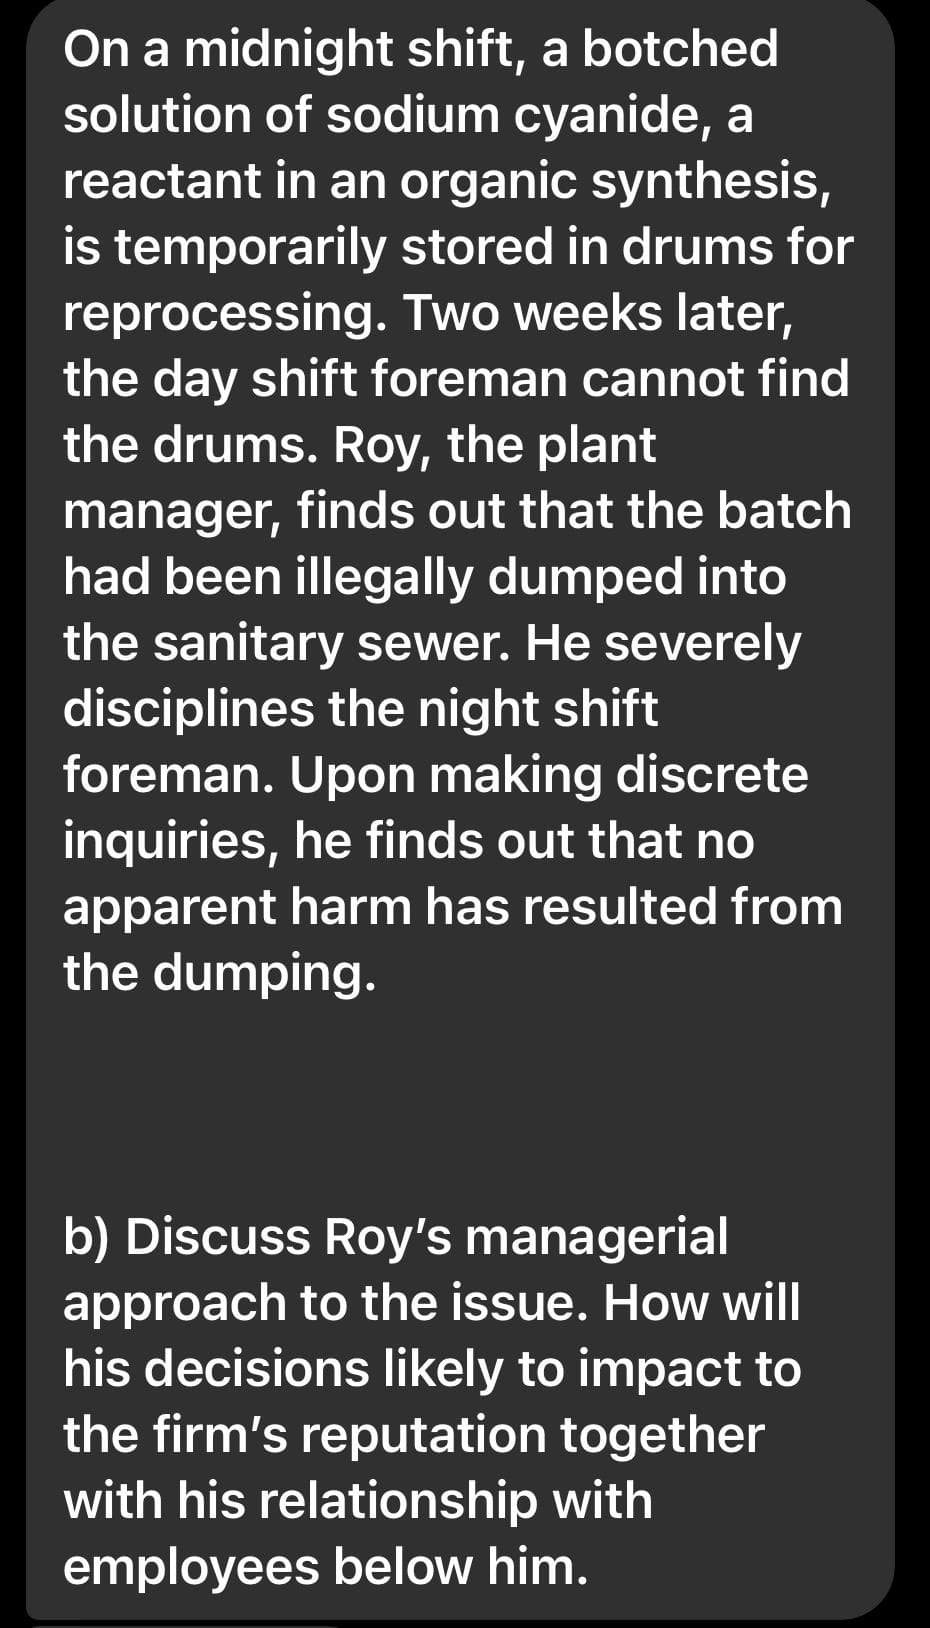 On a midnight shift, a botched
solution of sodium cyanide, a
reactant in an organic synthesis,
is temporarily stored in drums for
reprocessing. Two weeks later,
the day shift foreman cannot find
the drums. Roy, the plant
manager, finds out that the batch
had been illegally dumped into
the sanitary sewer. He severely
disciplines the night shift
foreman. Upon making discrete
inquiries, he finds out that no
apparent harm has resulted from
the dumping.
b) Discuss Roy's managerial
approach to the issue. How will
his decisions likely to impact to
the firm's reputation together
with his relationship with
employees below him.